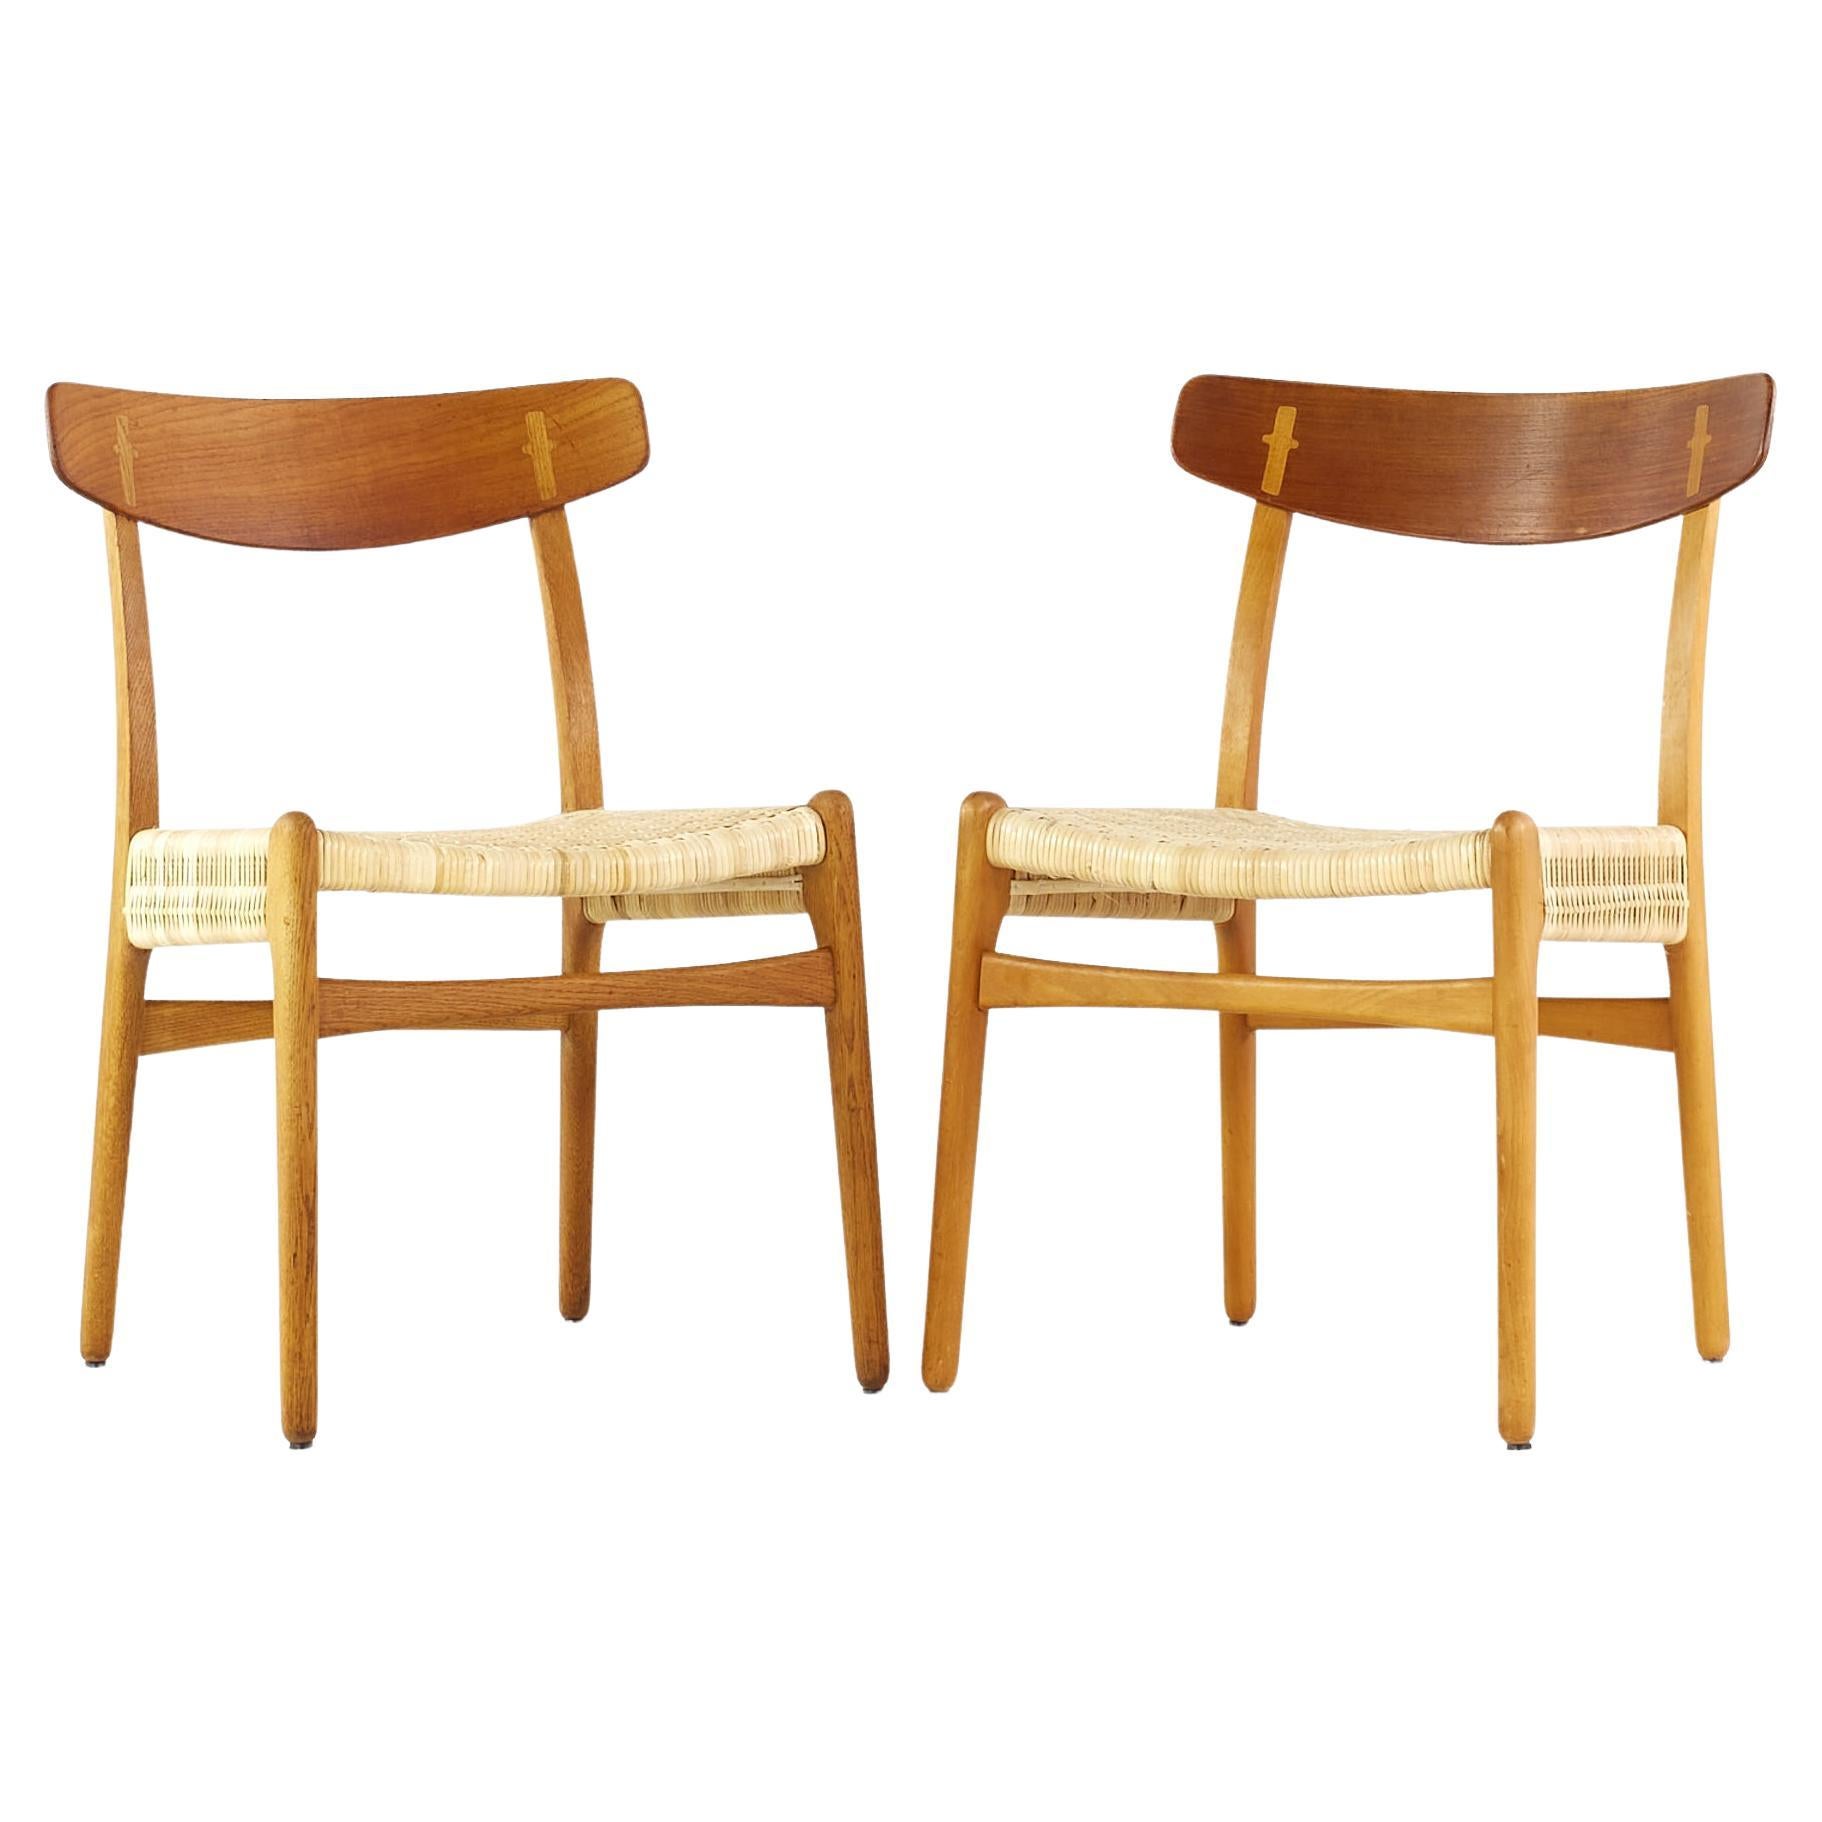 Hans Wegner for Carl Hansen and Son Midcentury Teak CH23 Dining Chairs, Pair For Sale